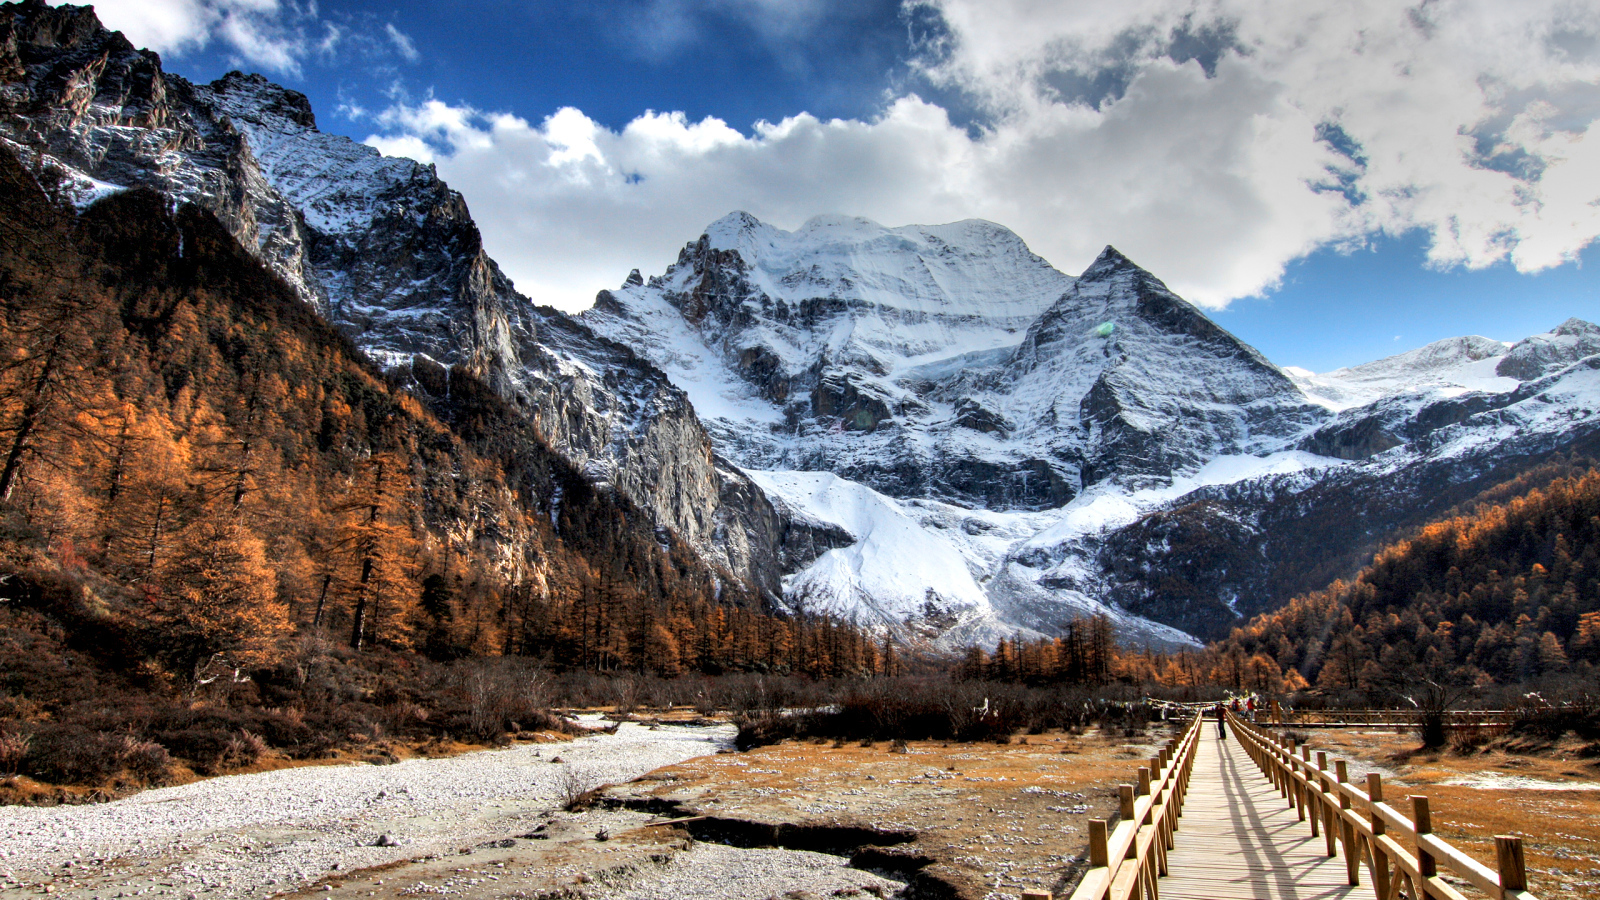 A bridge at the foot of snowy majestic mountains